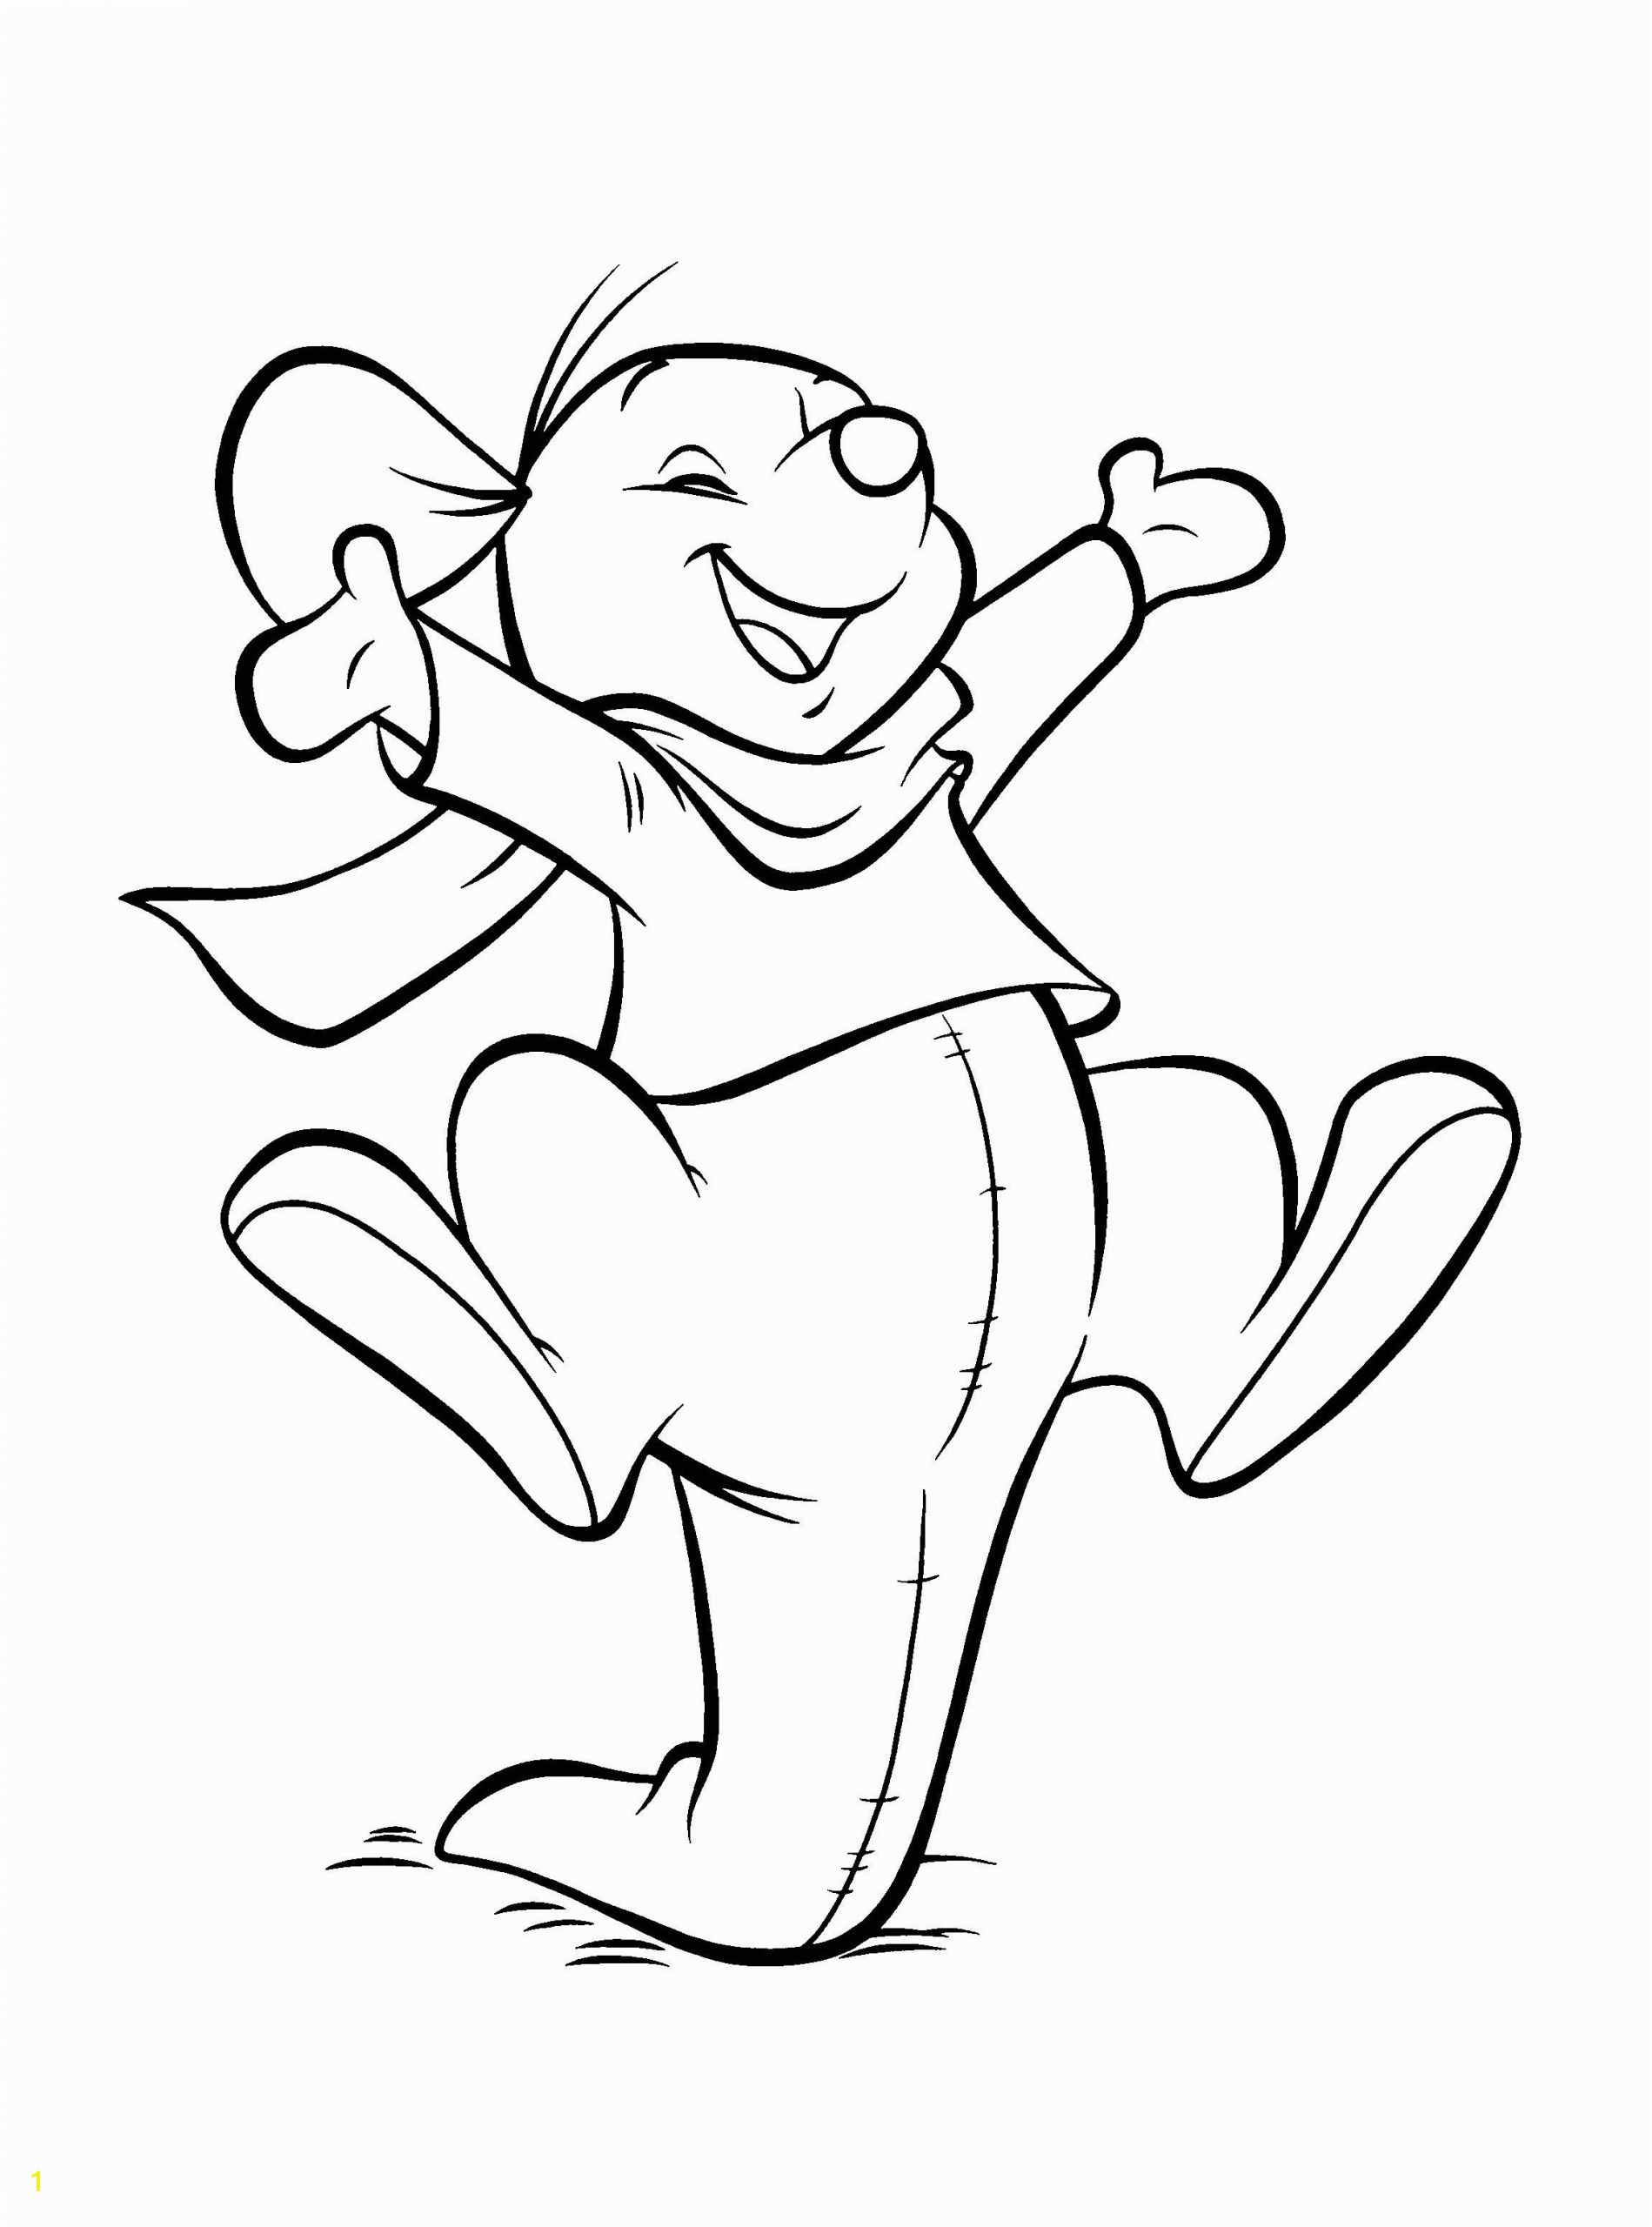 Eeyore Winnie the Pooh Coloring Pages Poo Colouring Pages at Getcolorings